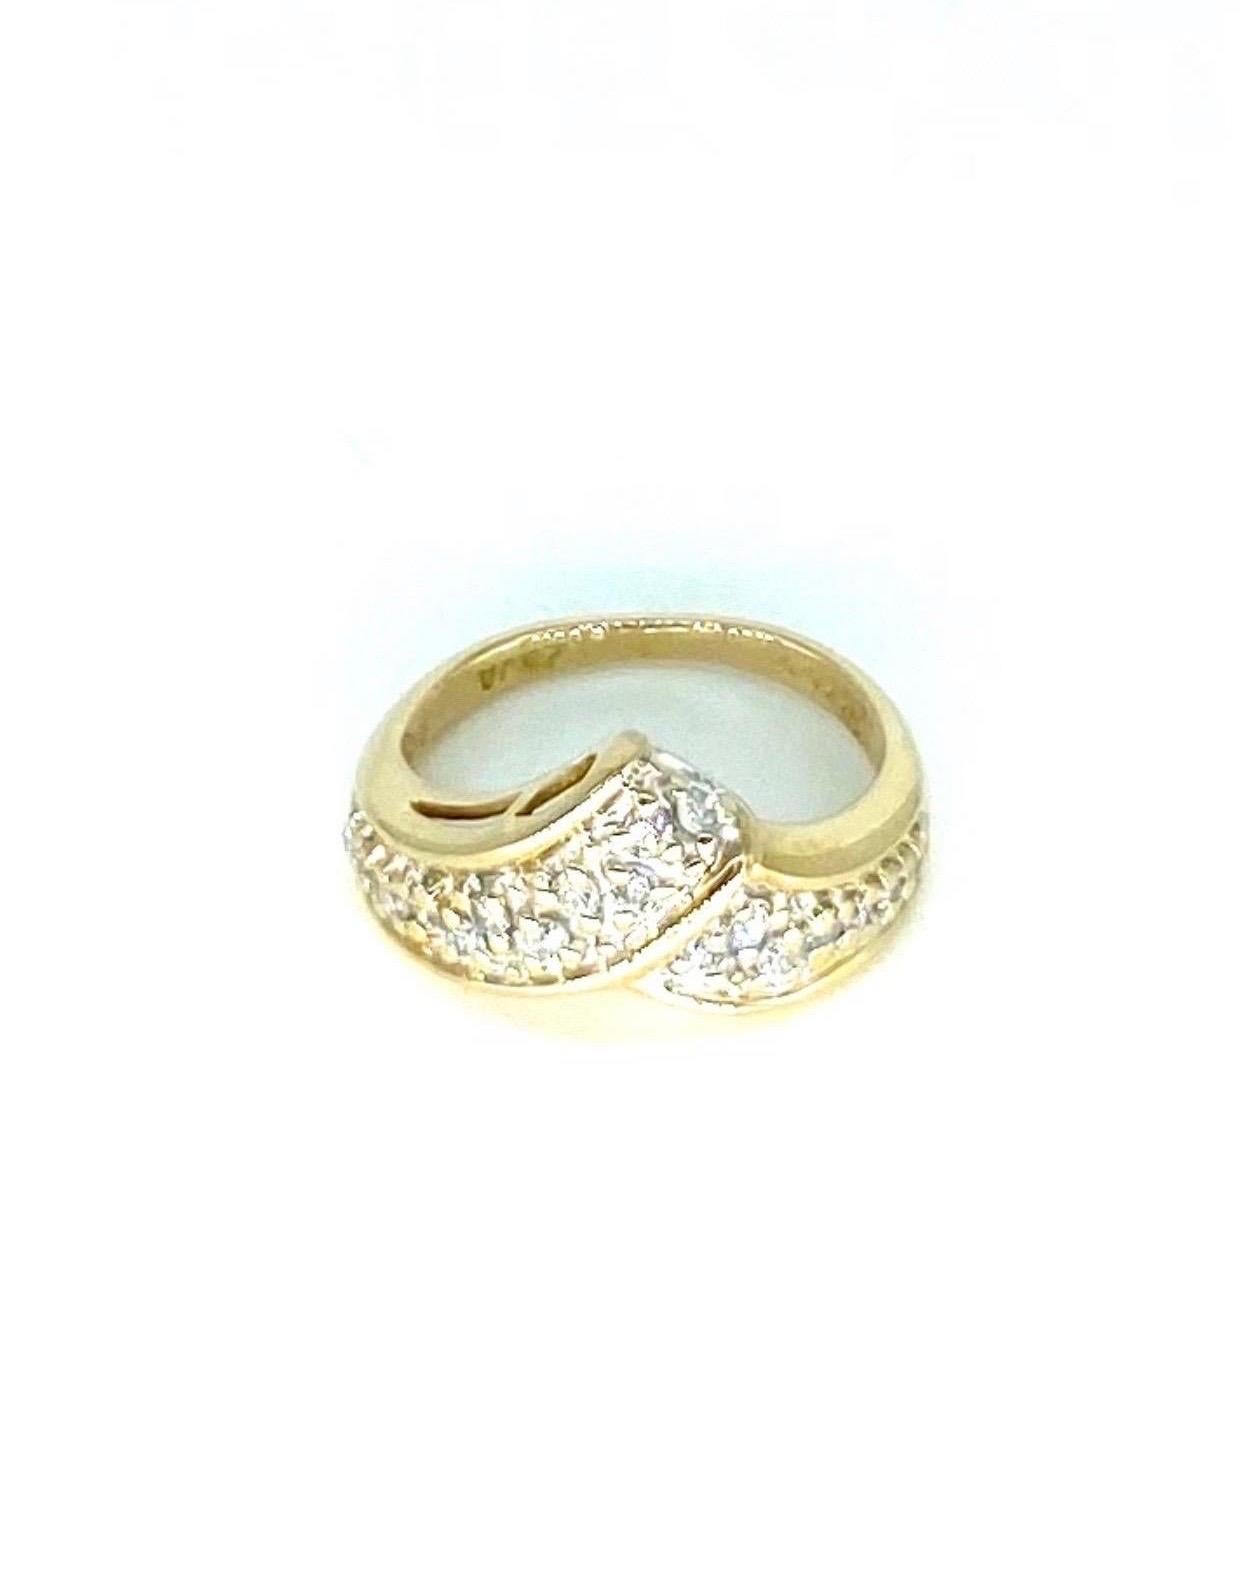 Vintage 0.25 Carat Diamond Tiara Ring 14k Gold In Excellent Condition For Sale In Miami, FL